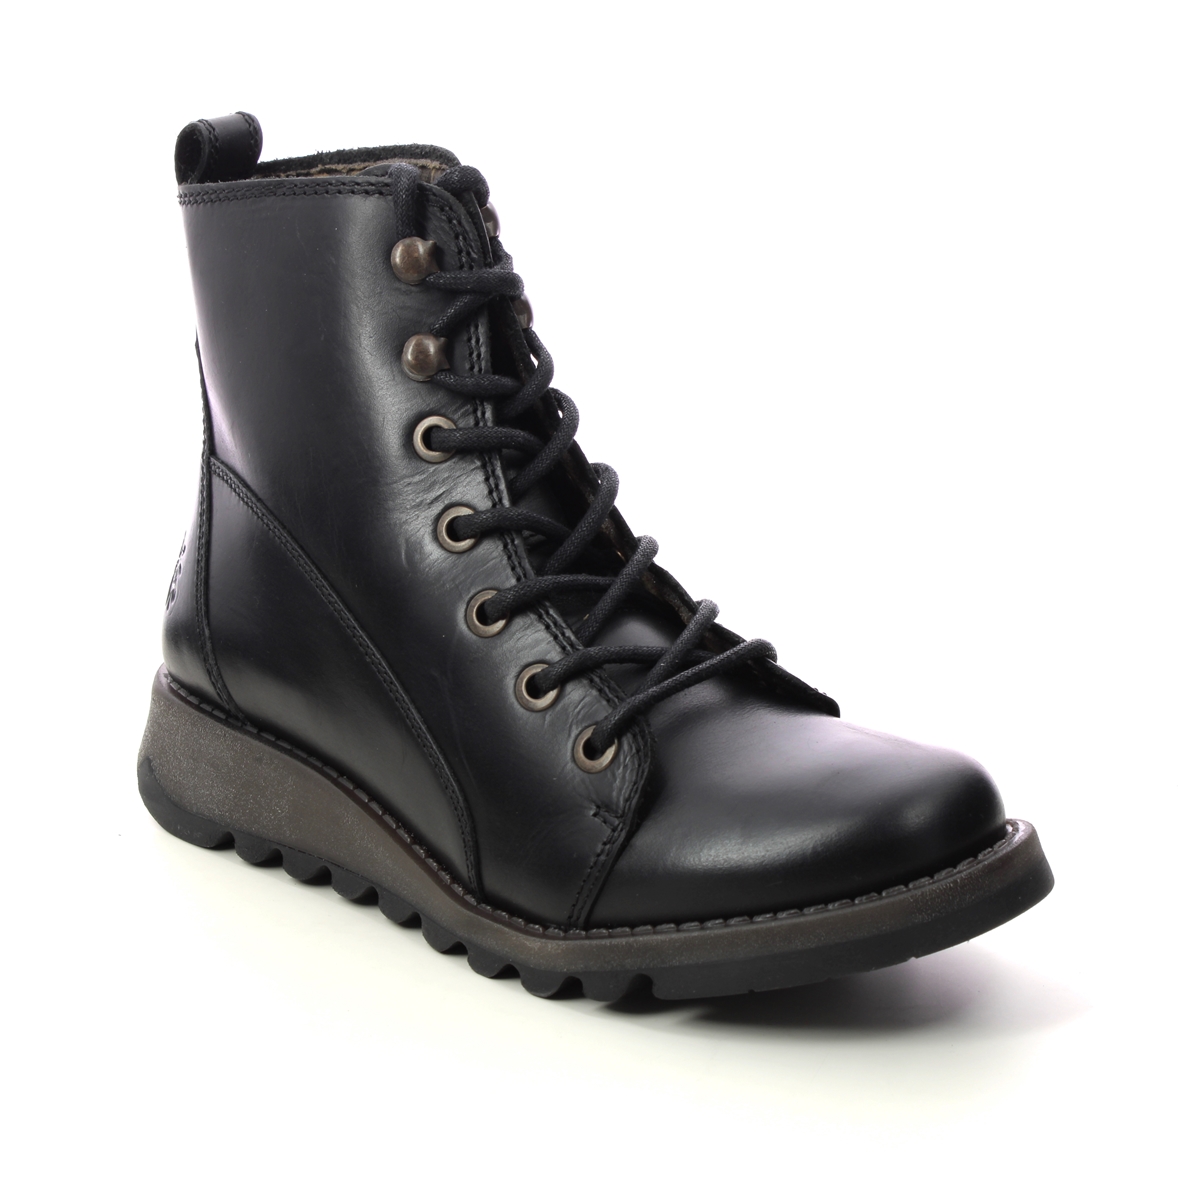 Fly London Sore   Sminx Black Leather Womens Lace Up Boots P144813 In Size 41 In Plain Black Leather